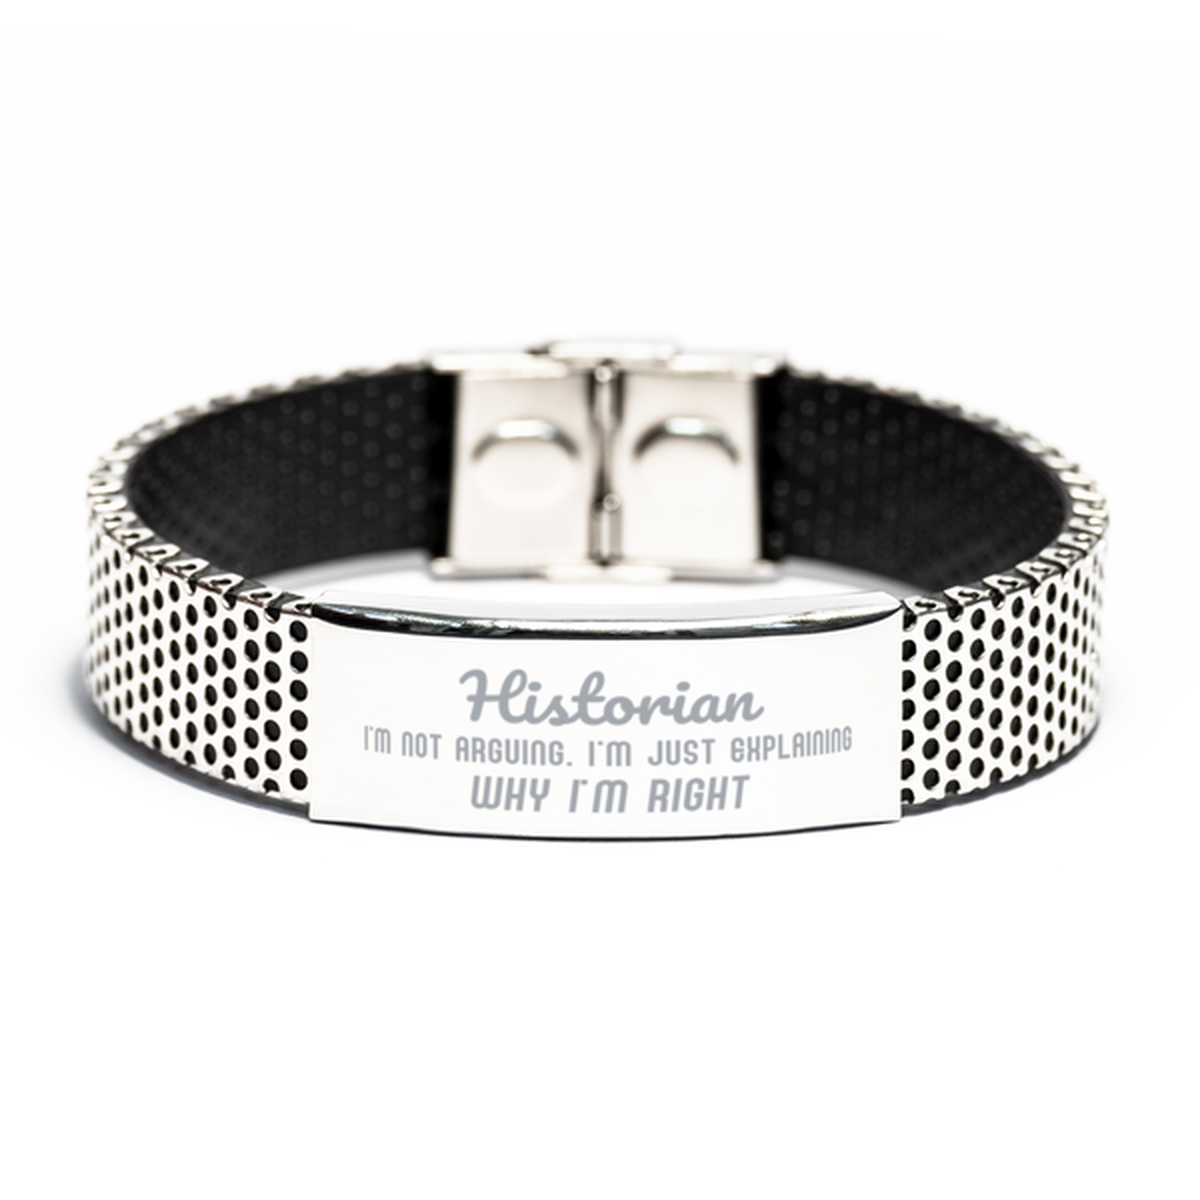 Historian I'm not Arguing. I'm Just Explaining Why I'm RIGHT Stainless Steel Bracelet, Funny Saying Quote Historian Gifts For Historian Graduation Birthday Christmas Gifts for Men Women Coworker